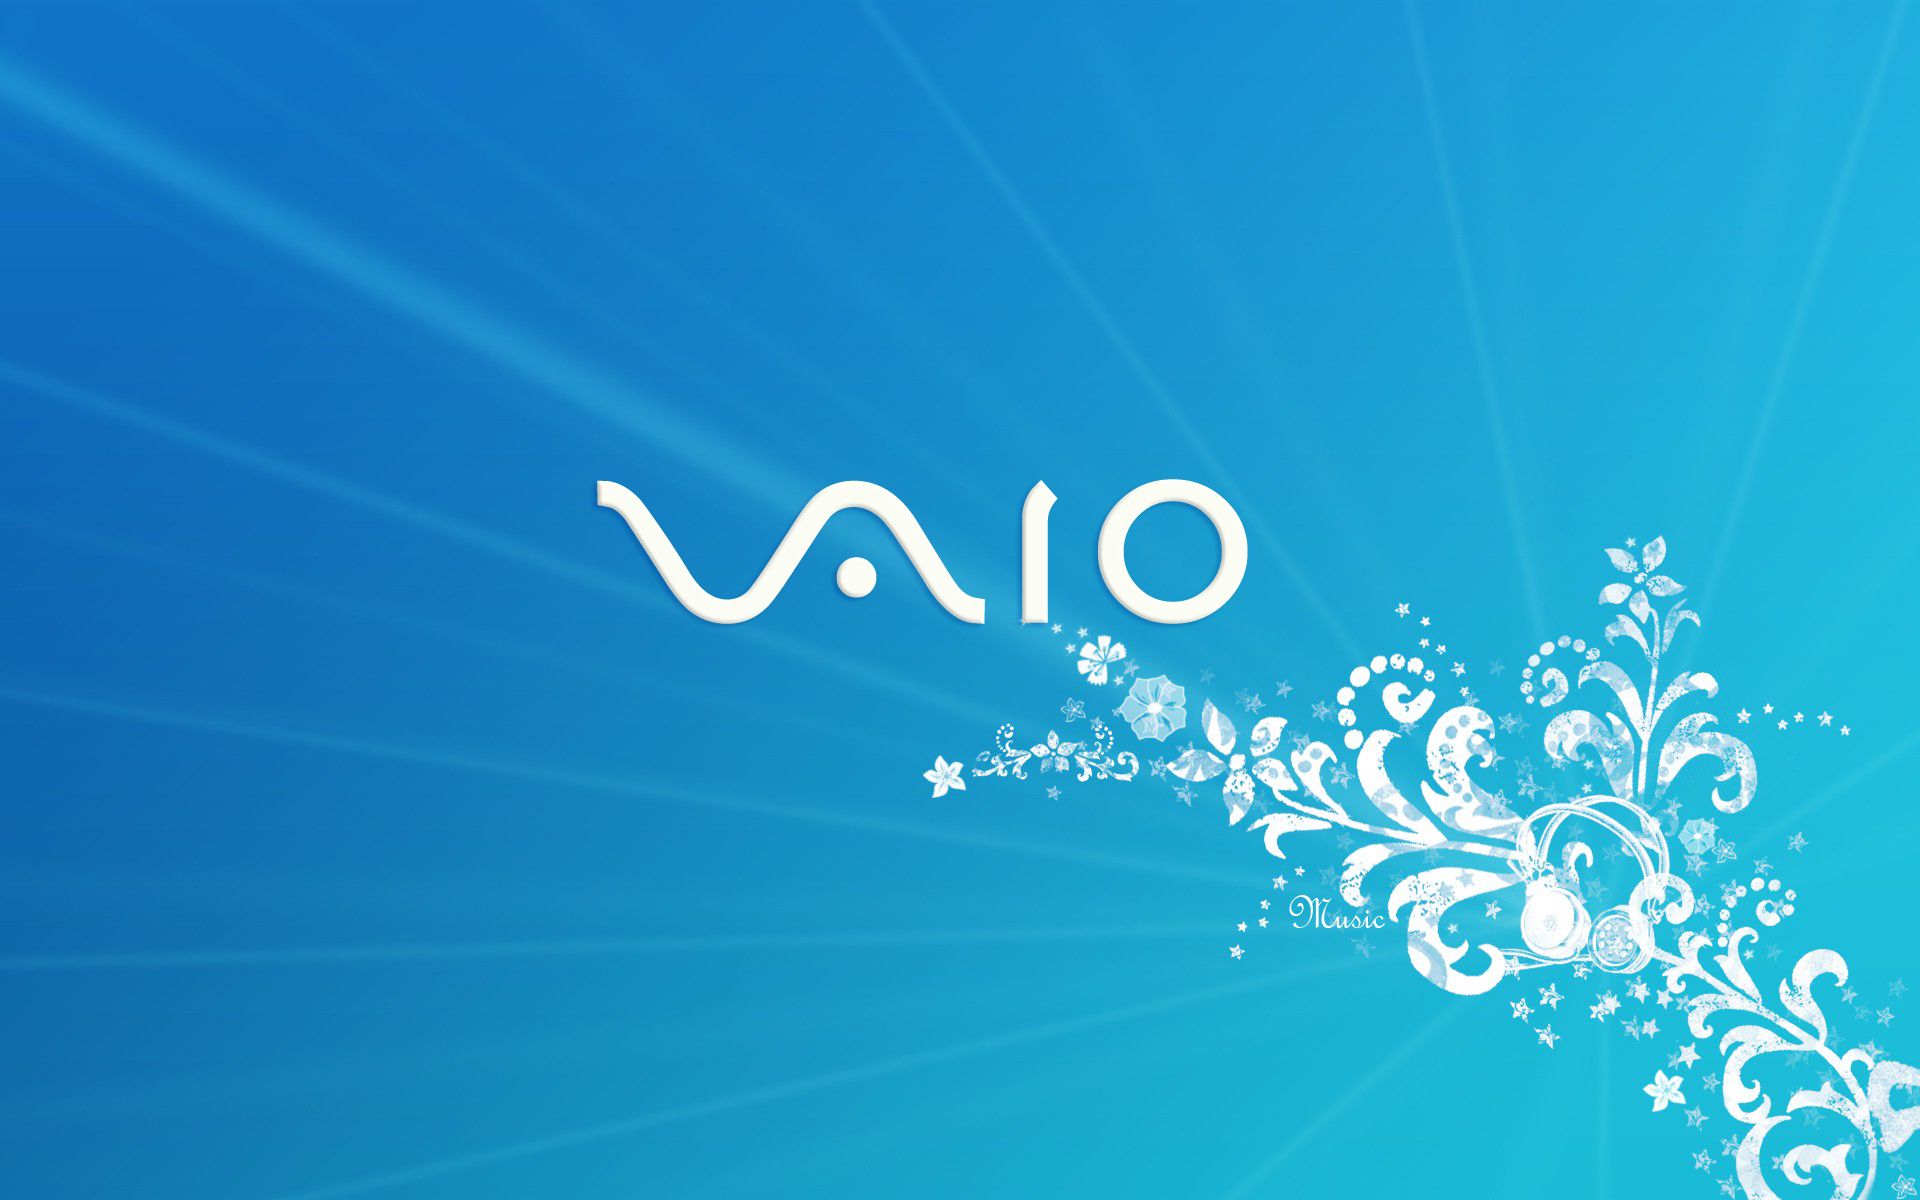 Sony Vaio Wallpaper Hd Wallpapers High Definition